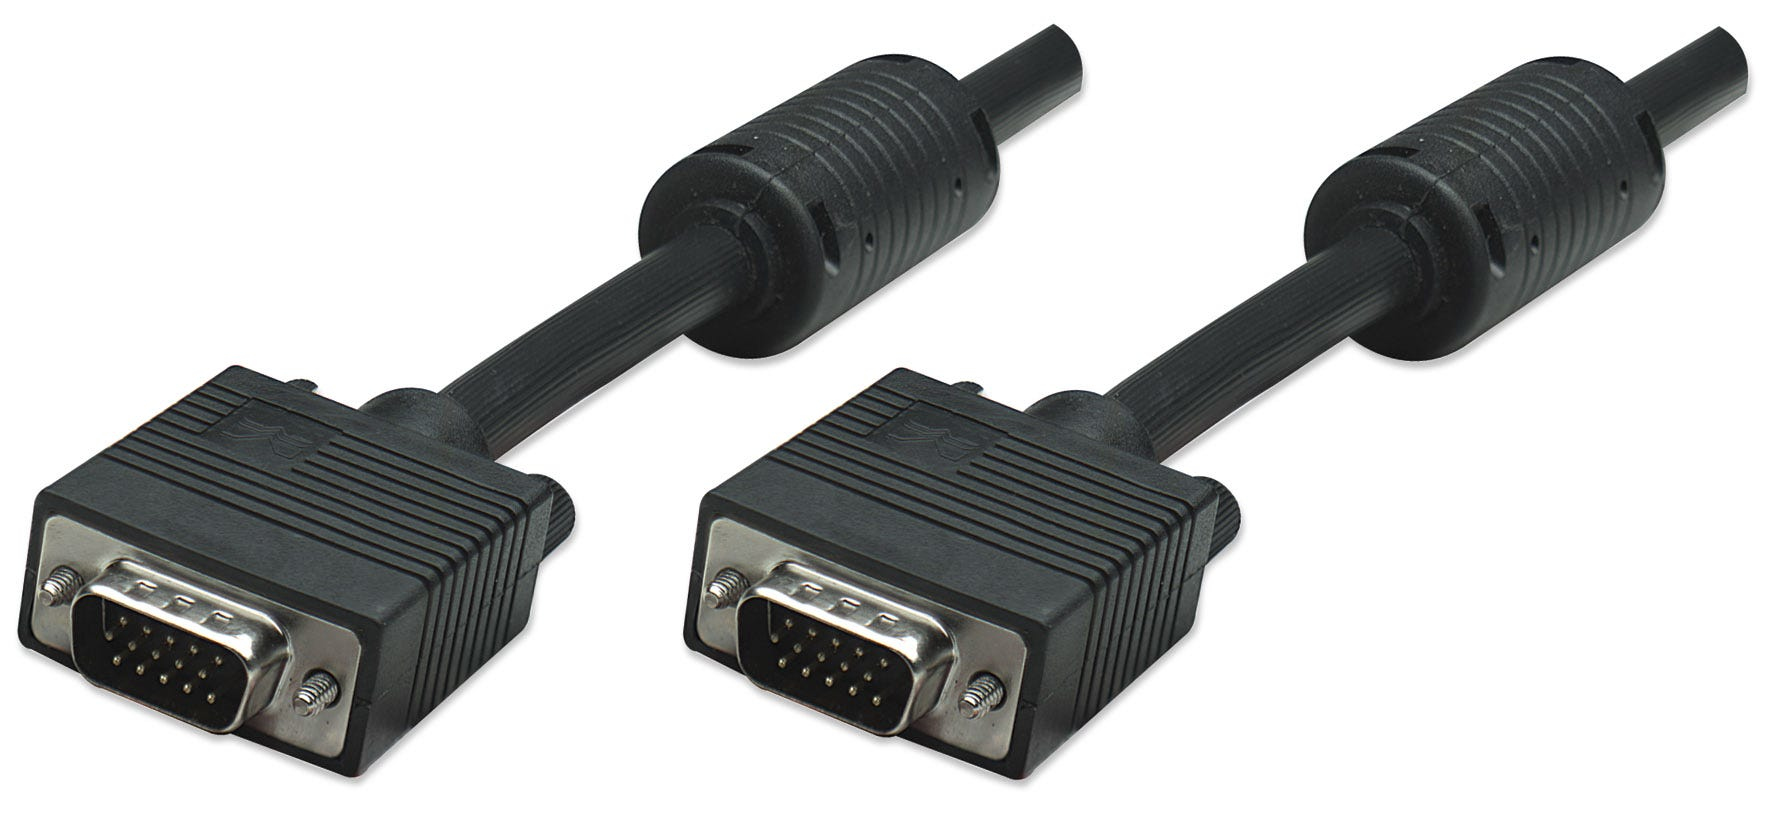 Manhattan VGA Monitor Cable (with Ferrite Cores), 15m, Black, Male to Male, HD15, Cable of higher SVGA Specification (fully compatible)